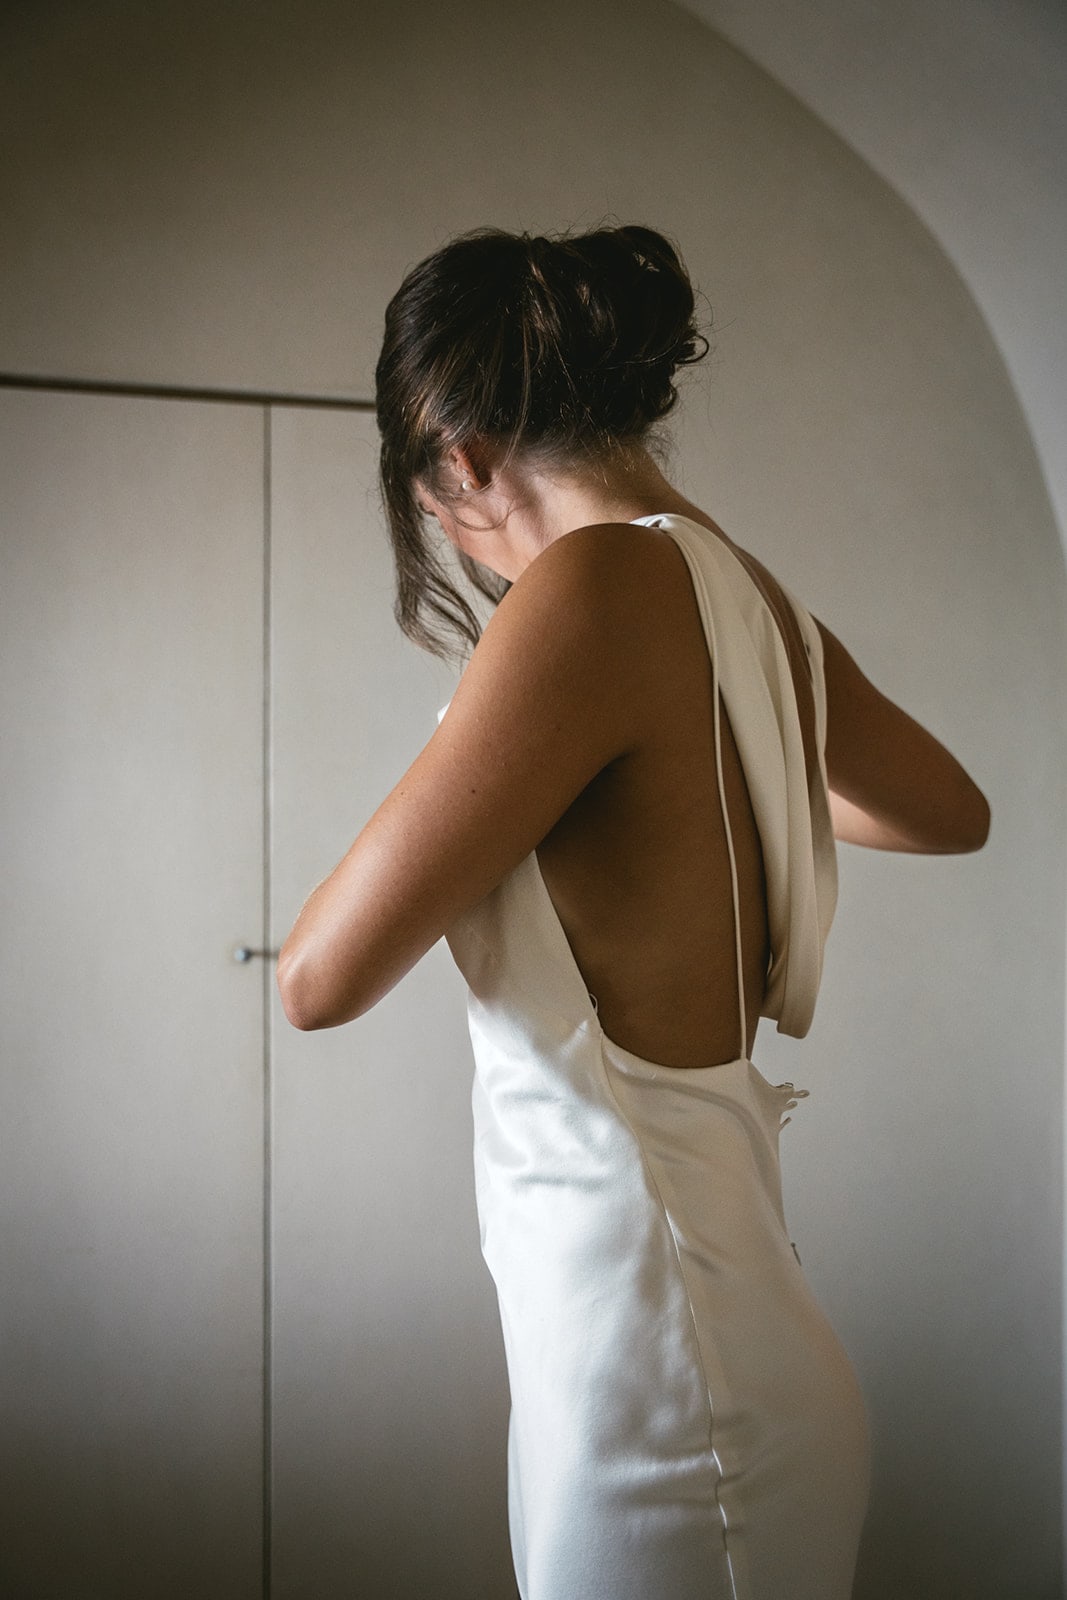 Bride donning her dress, enveloped in the elegance and anticipation of elopement